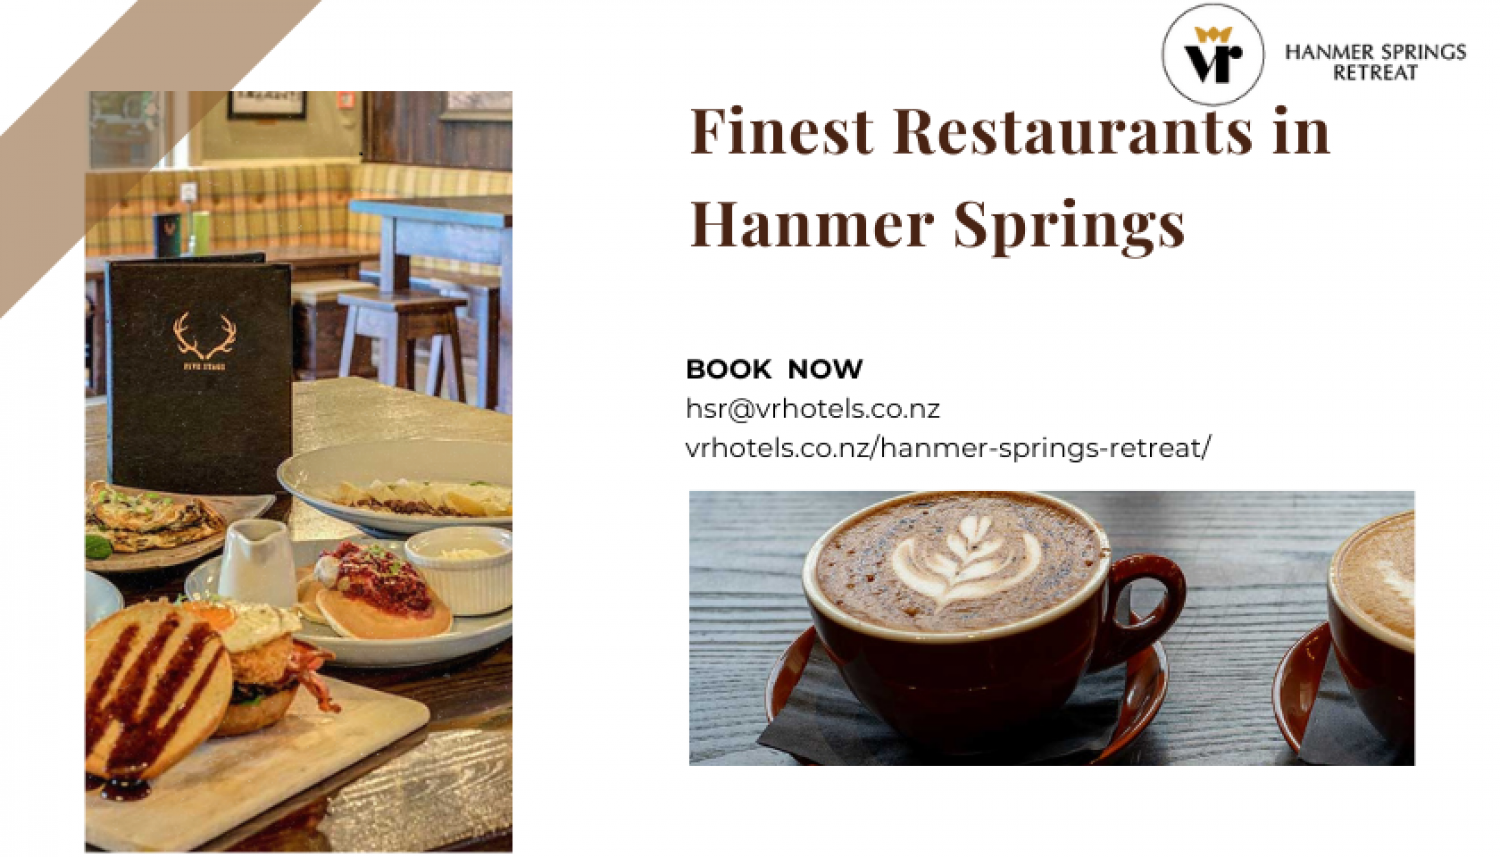 Culinary Bliss Awaits: Dining at the Finest Restaurants in Hanmer Springs at Hanmer Springs Retreat Infographic